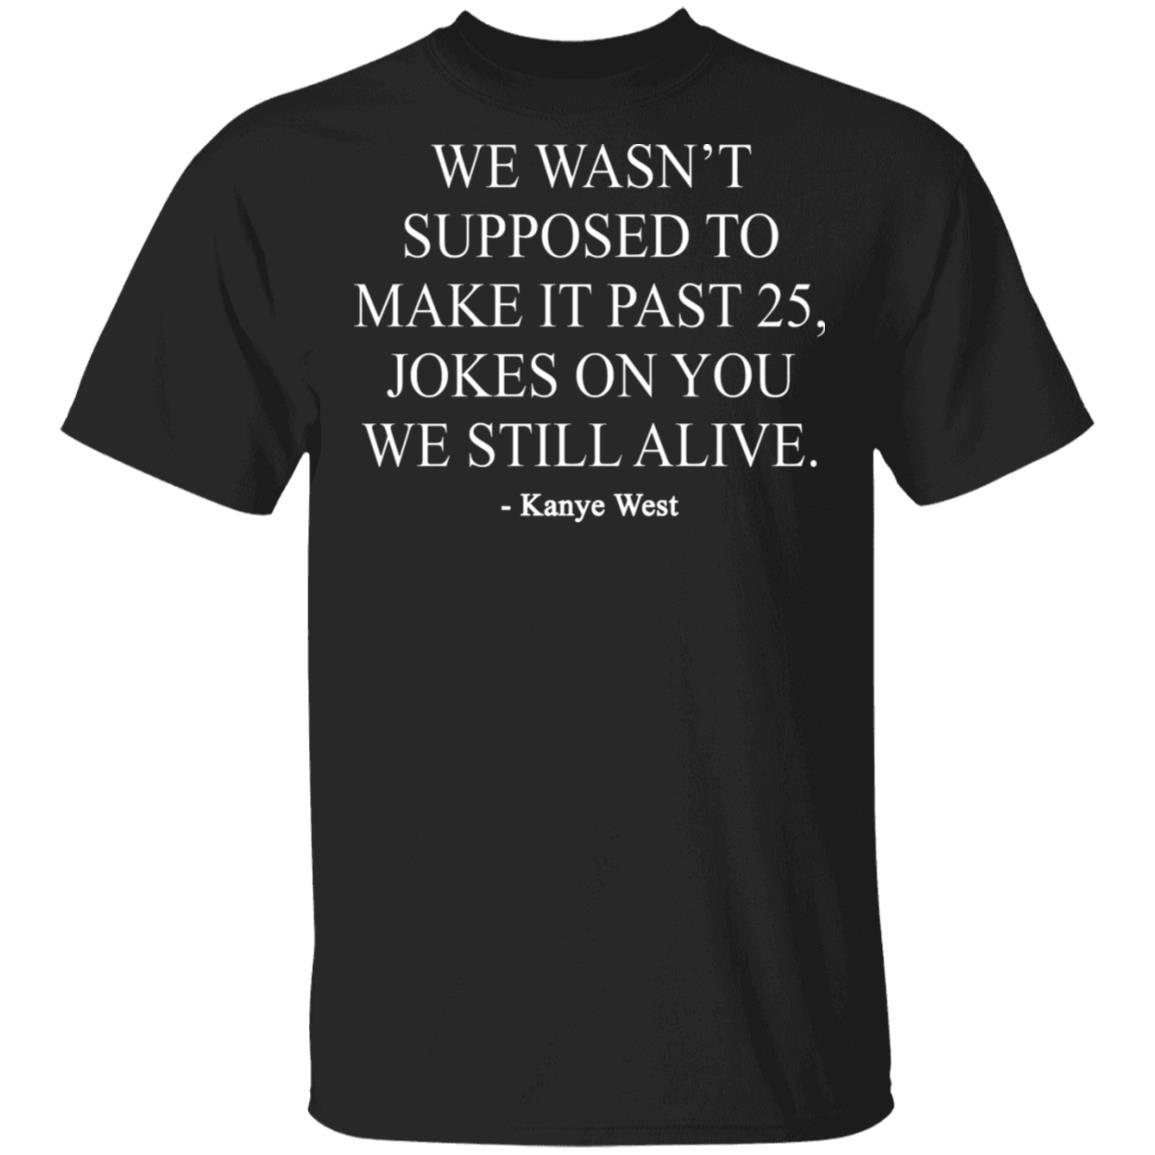 WE WASN’T SUPPOSED TO MAKE IT PAST 25, JOKES ON YOU WE STILL ALIVE SHIRT